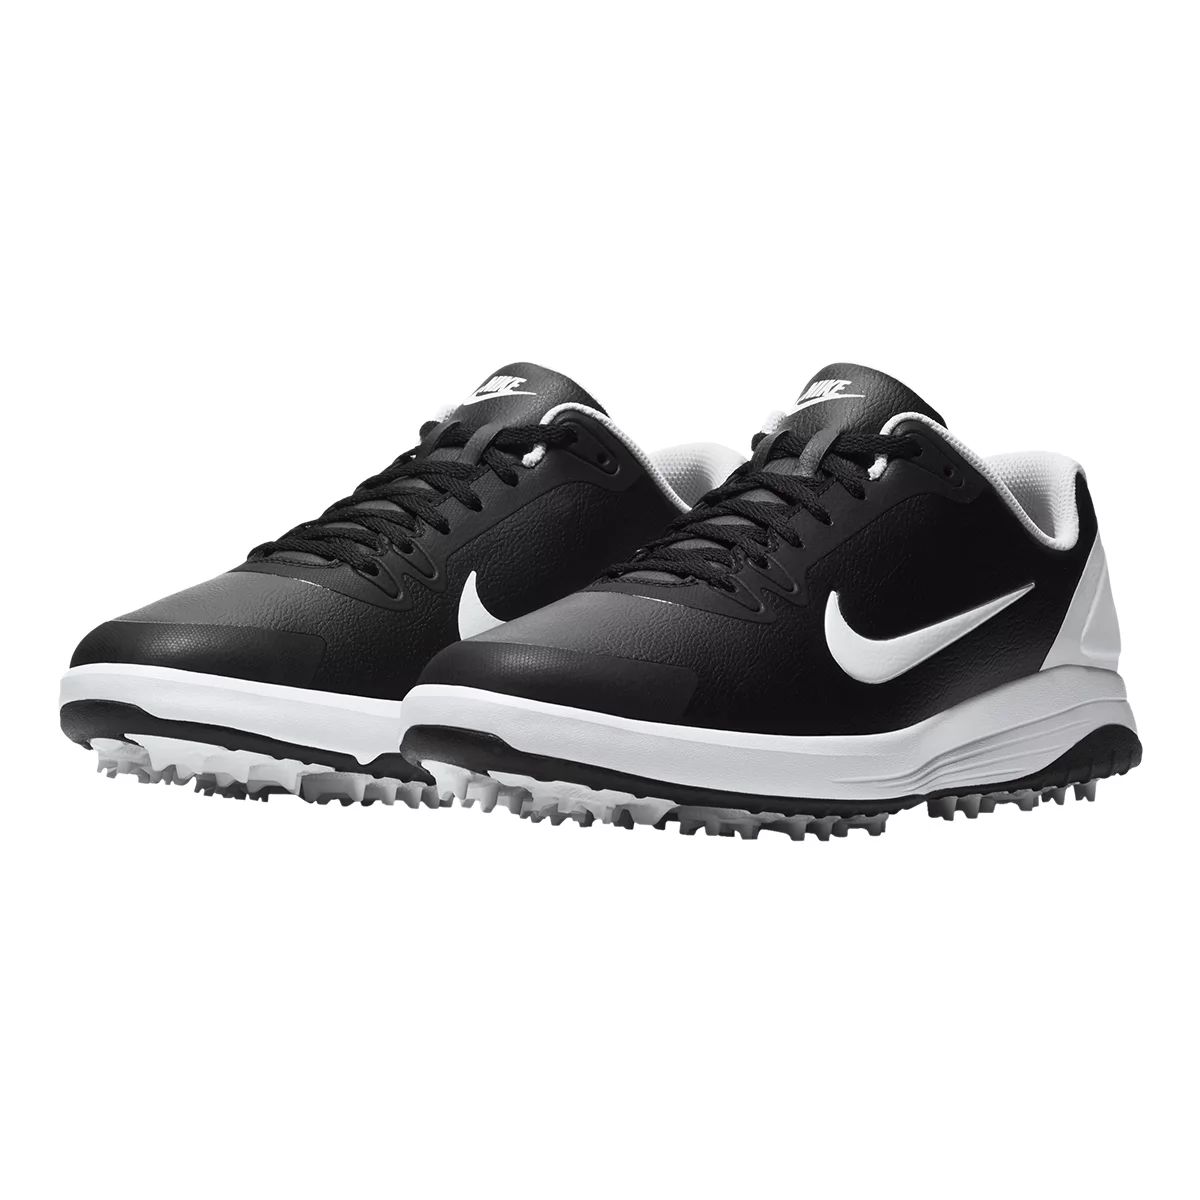 Nike Men's Infinity G Golf Shoes, Spiked, Synthetic Leather, Waterproof